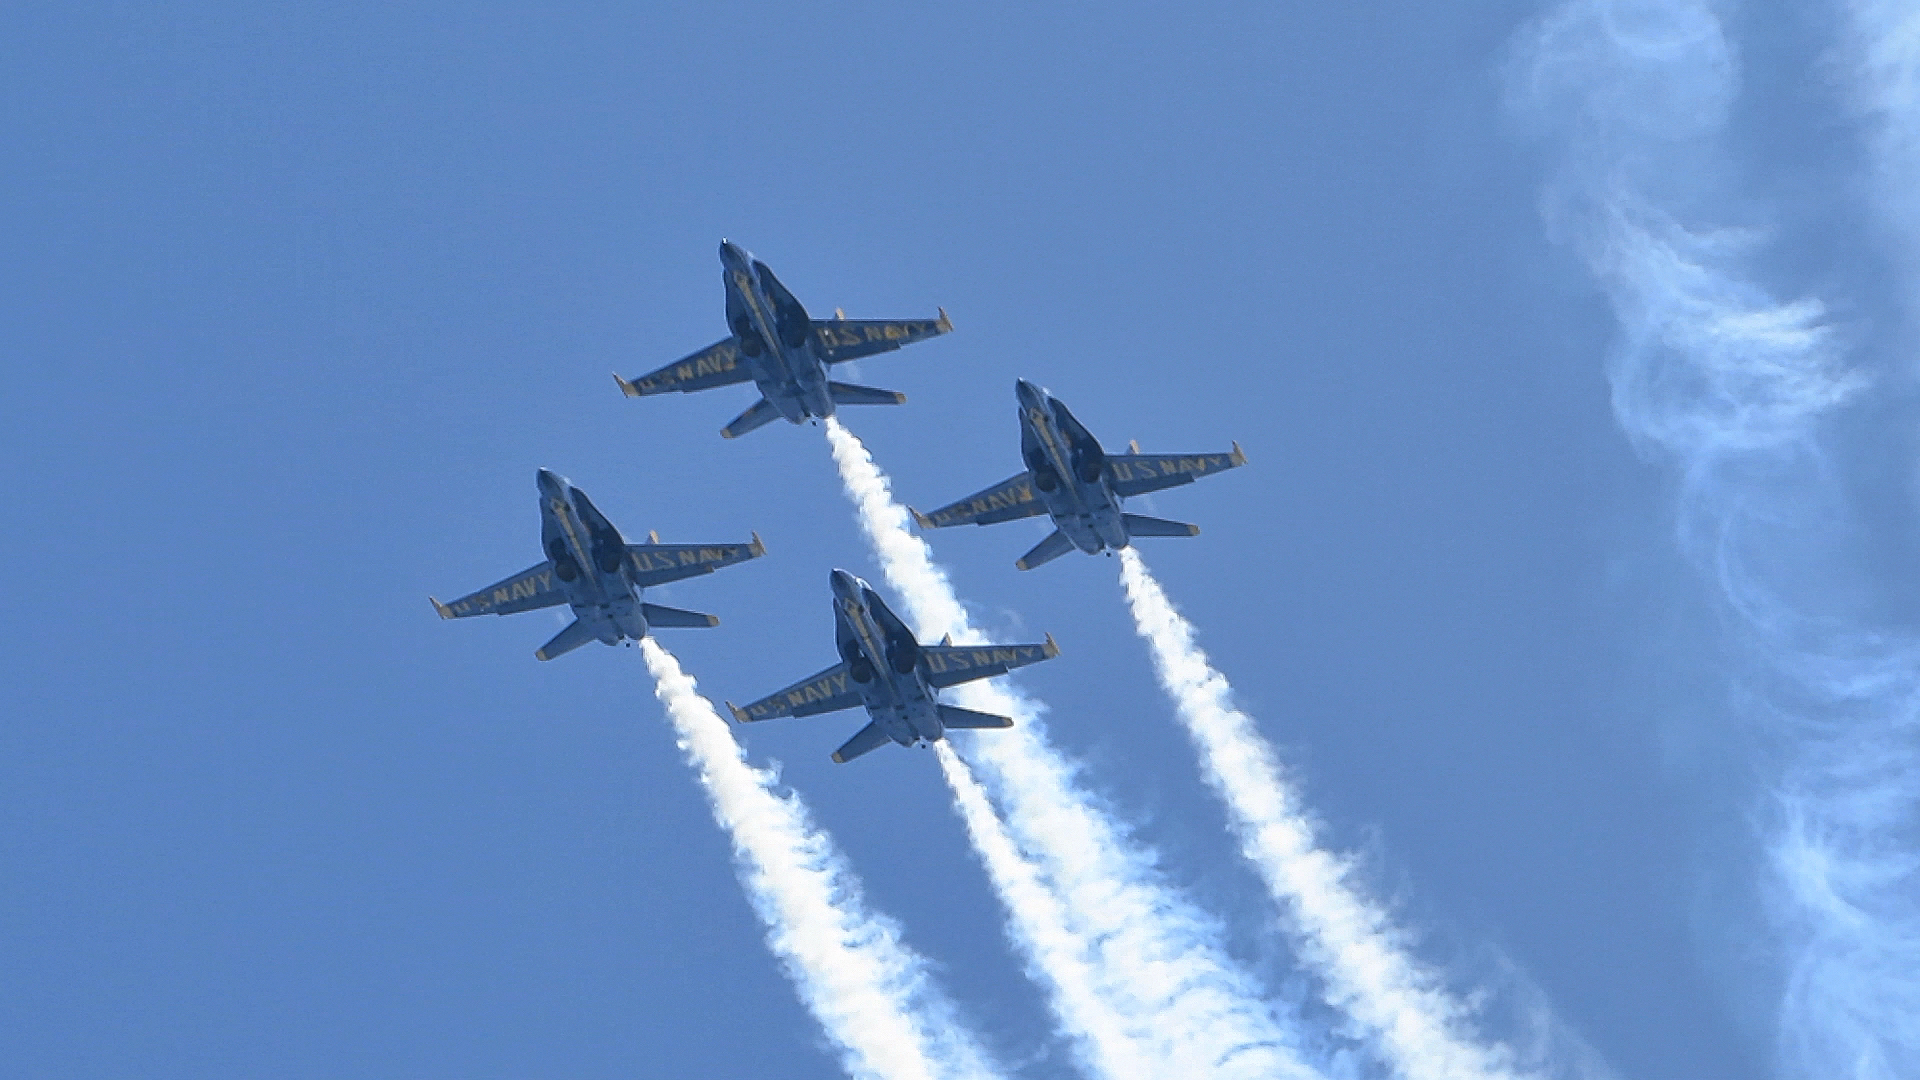 The USNA Blue Angels flying in a clear blue sky